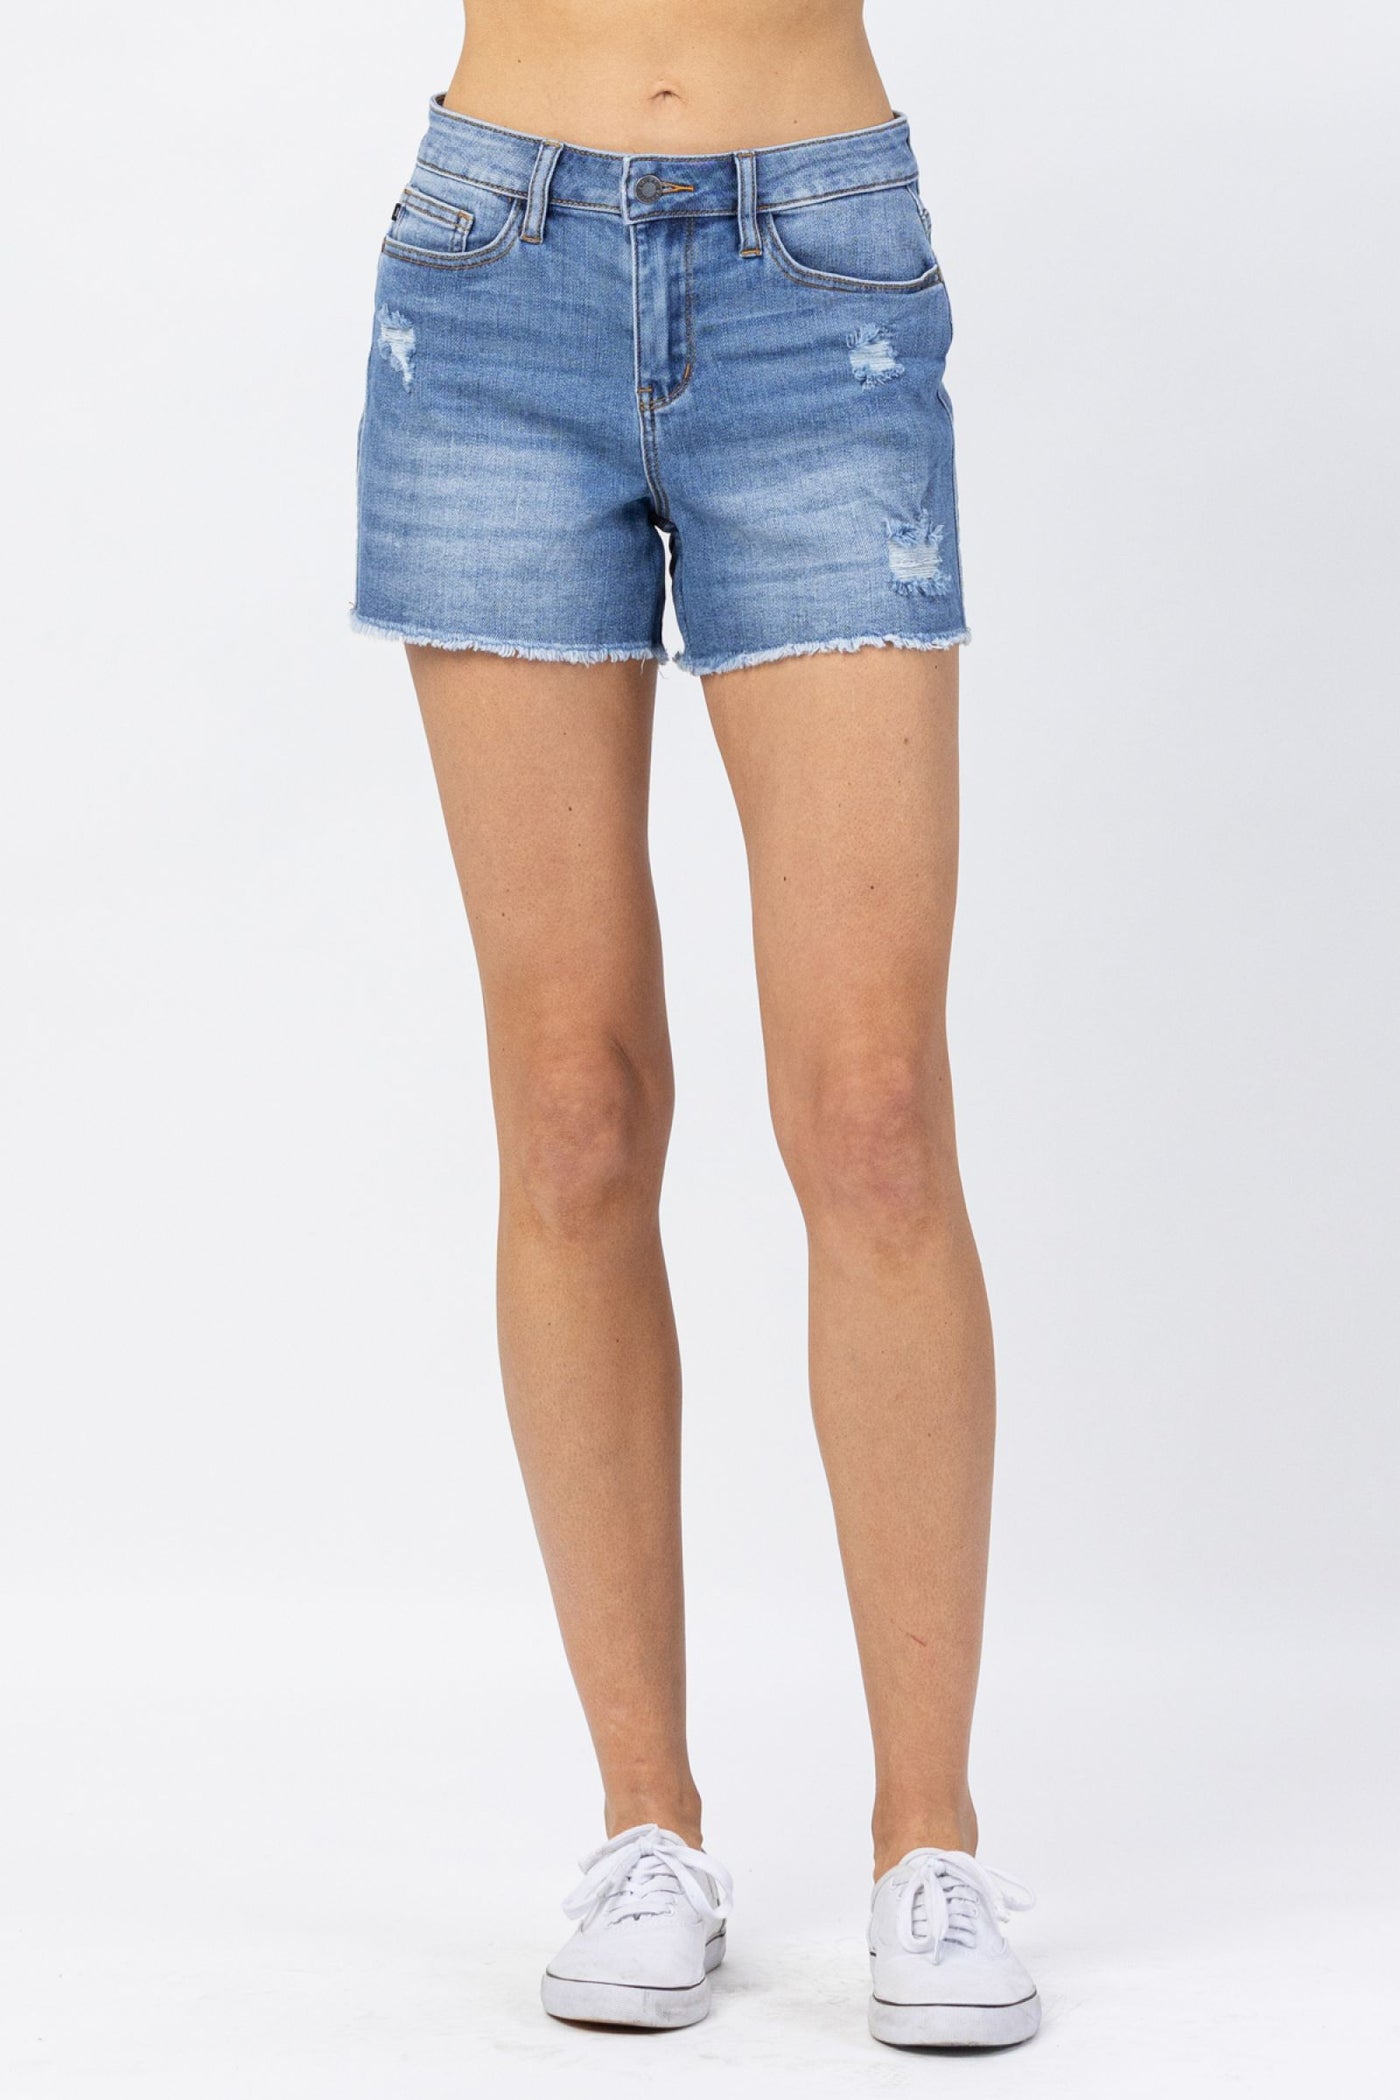 Judy Blue High Waist Distressed Shorts - Corinne Boutique Family Owned and Operated USA